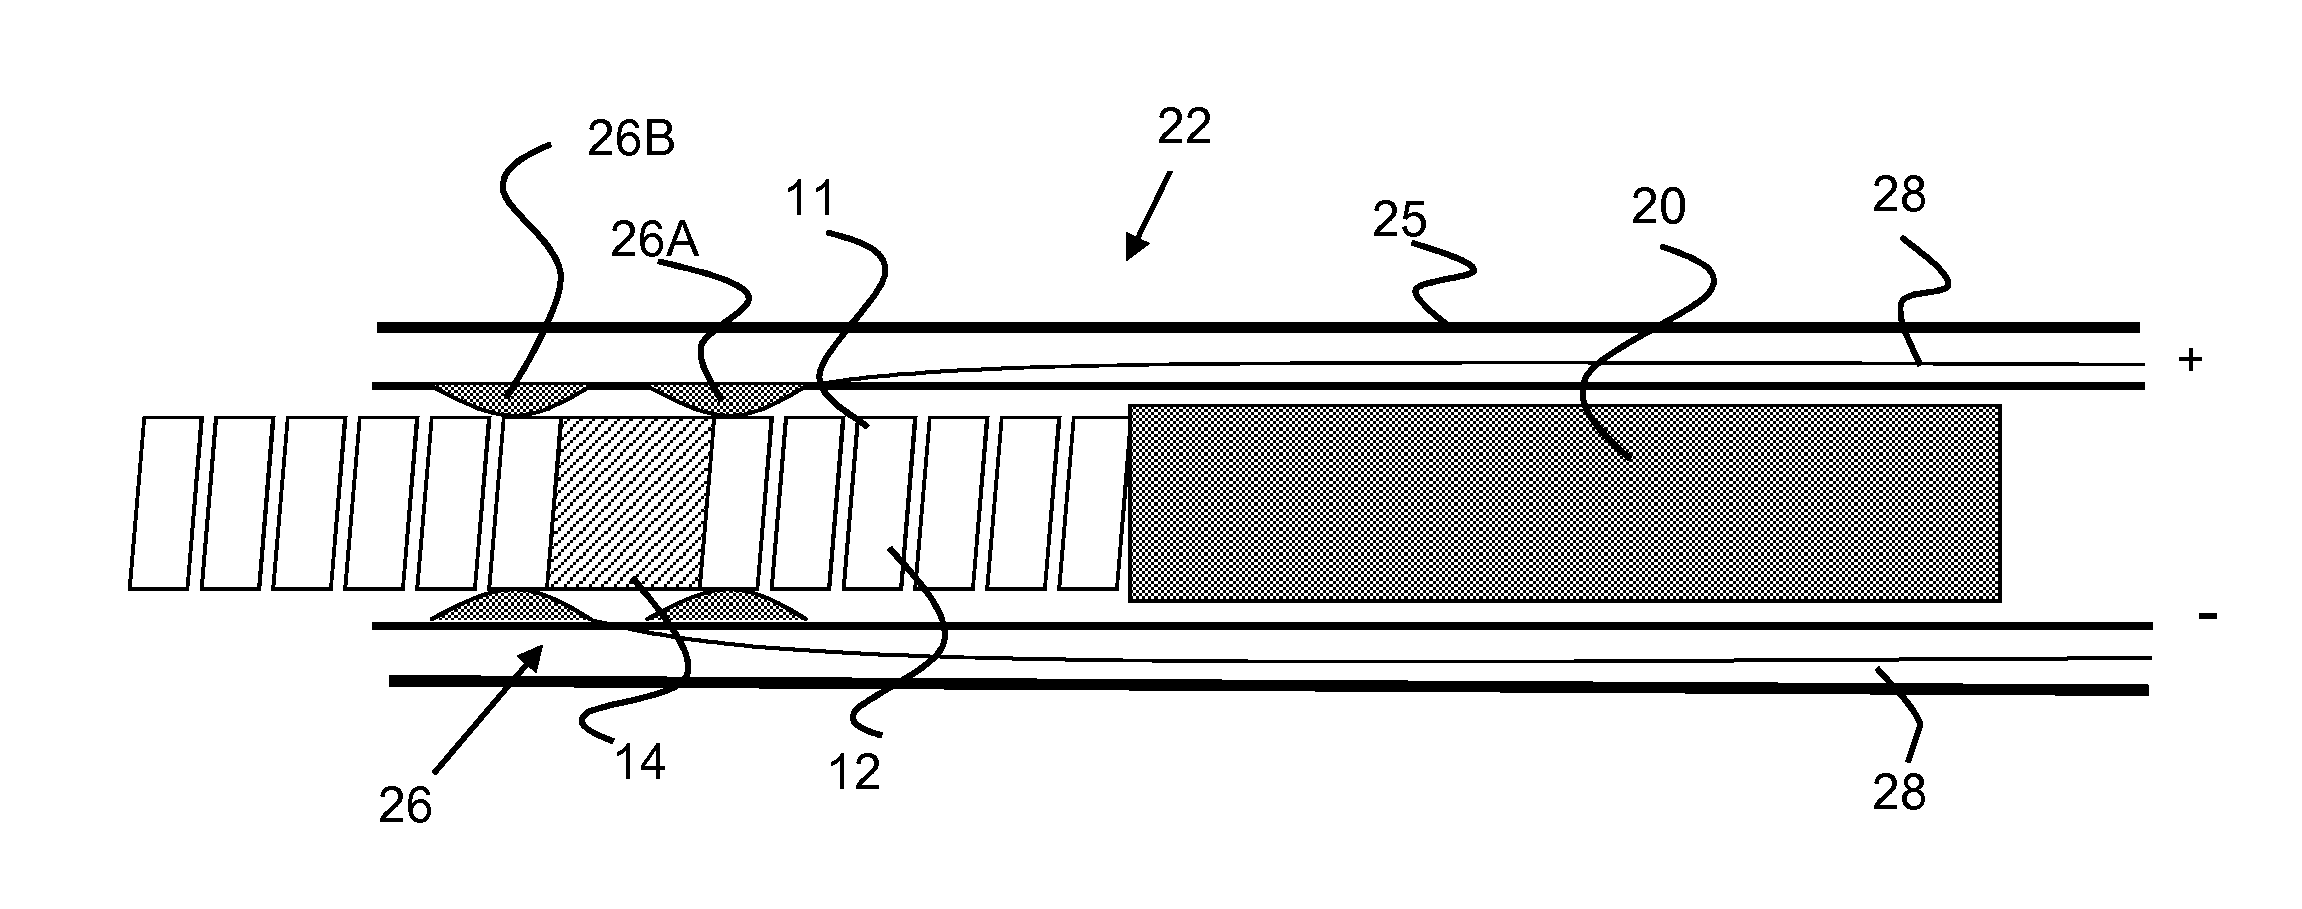 Device Delivery System